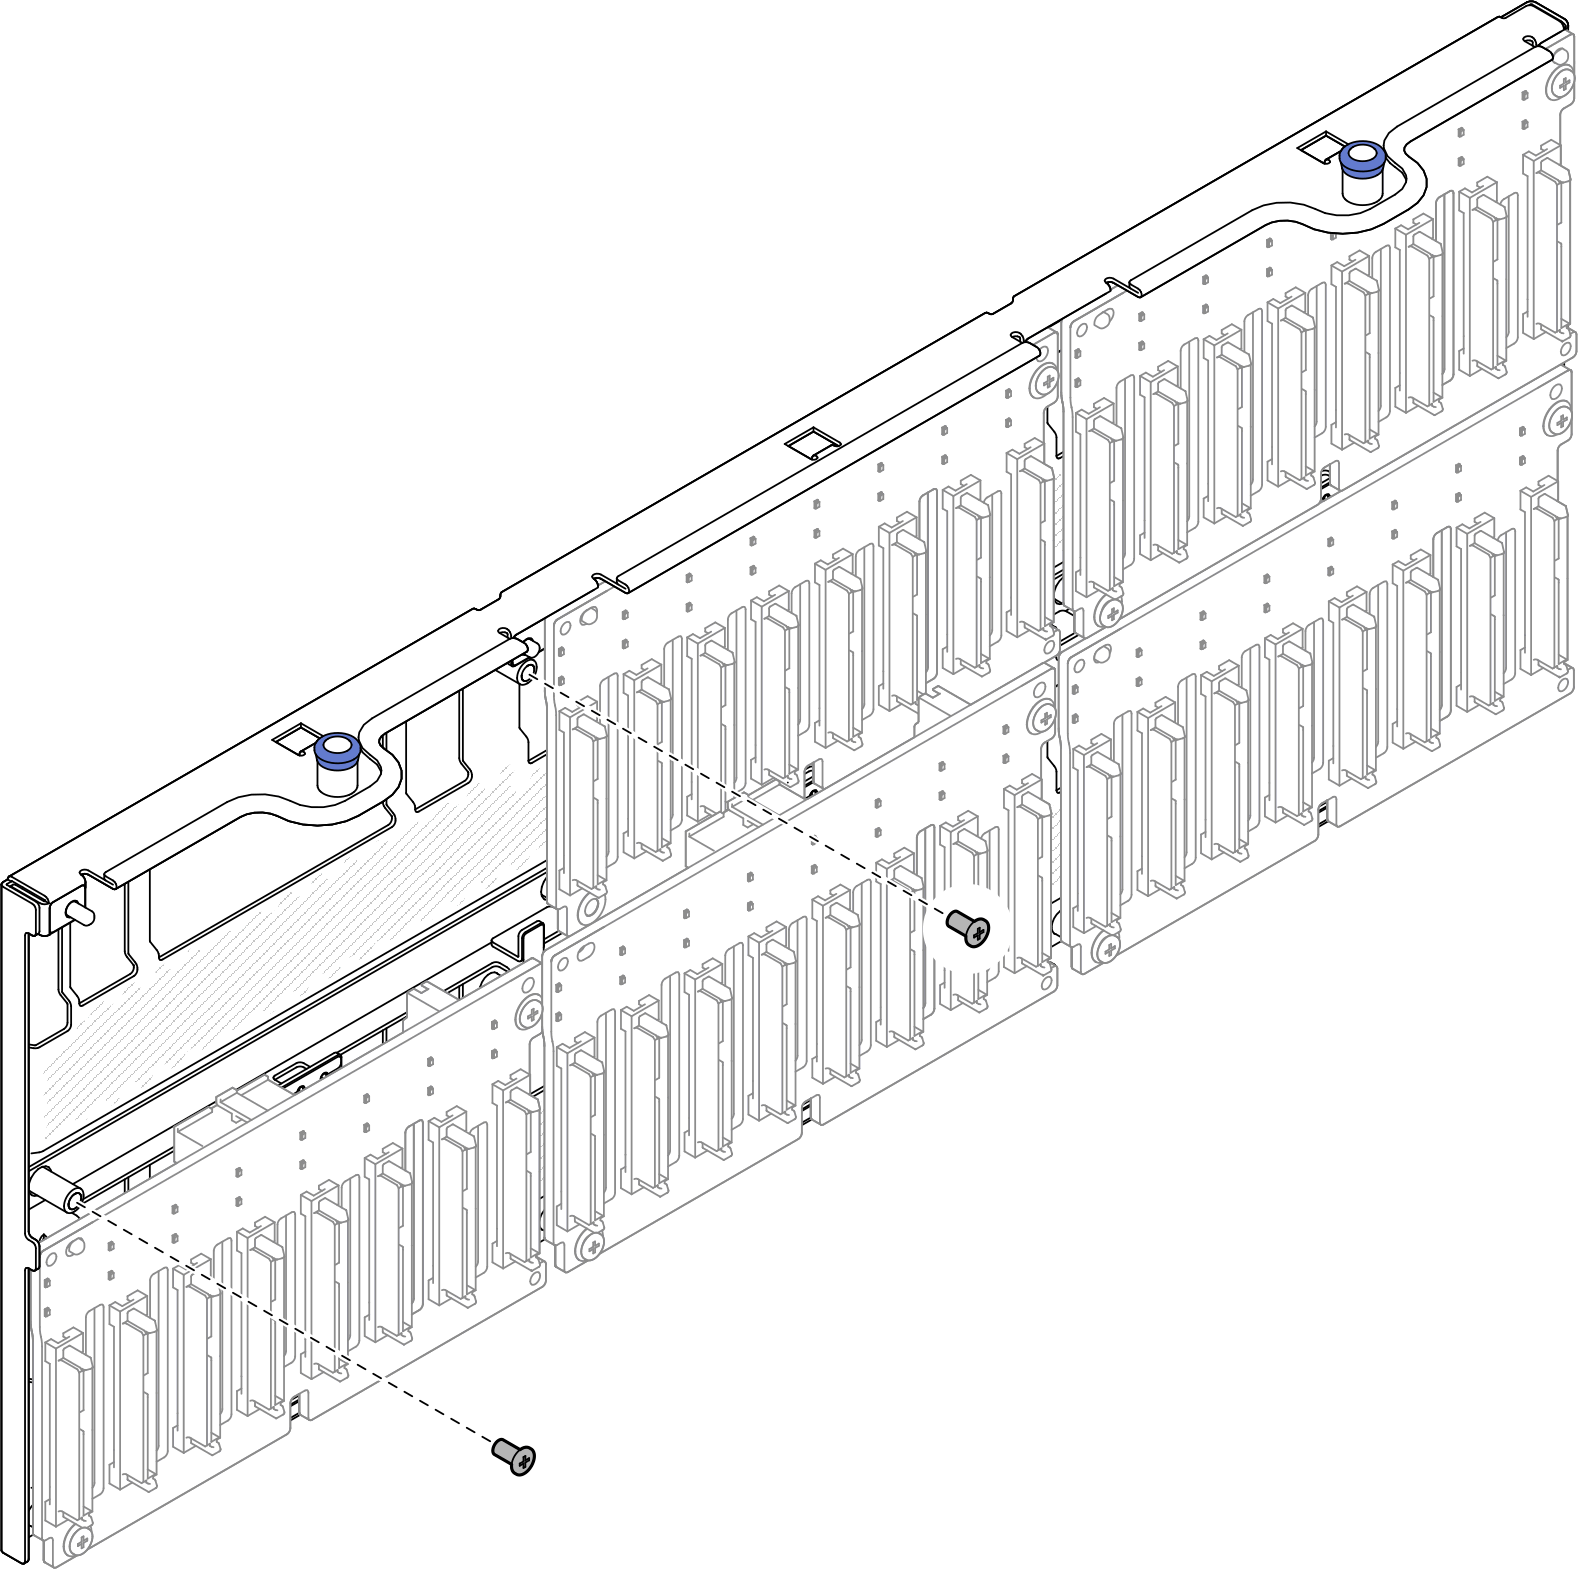 Spare screws on backplane carrier